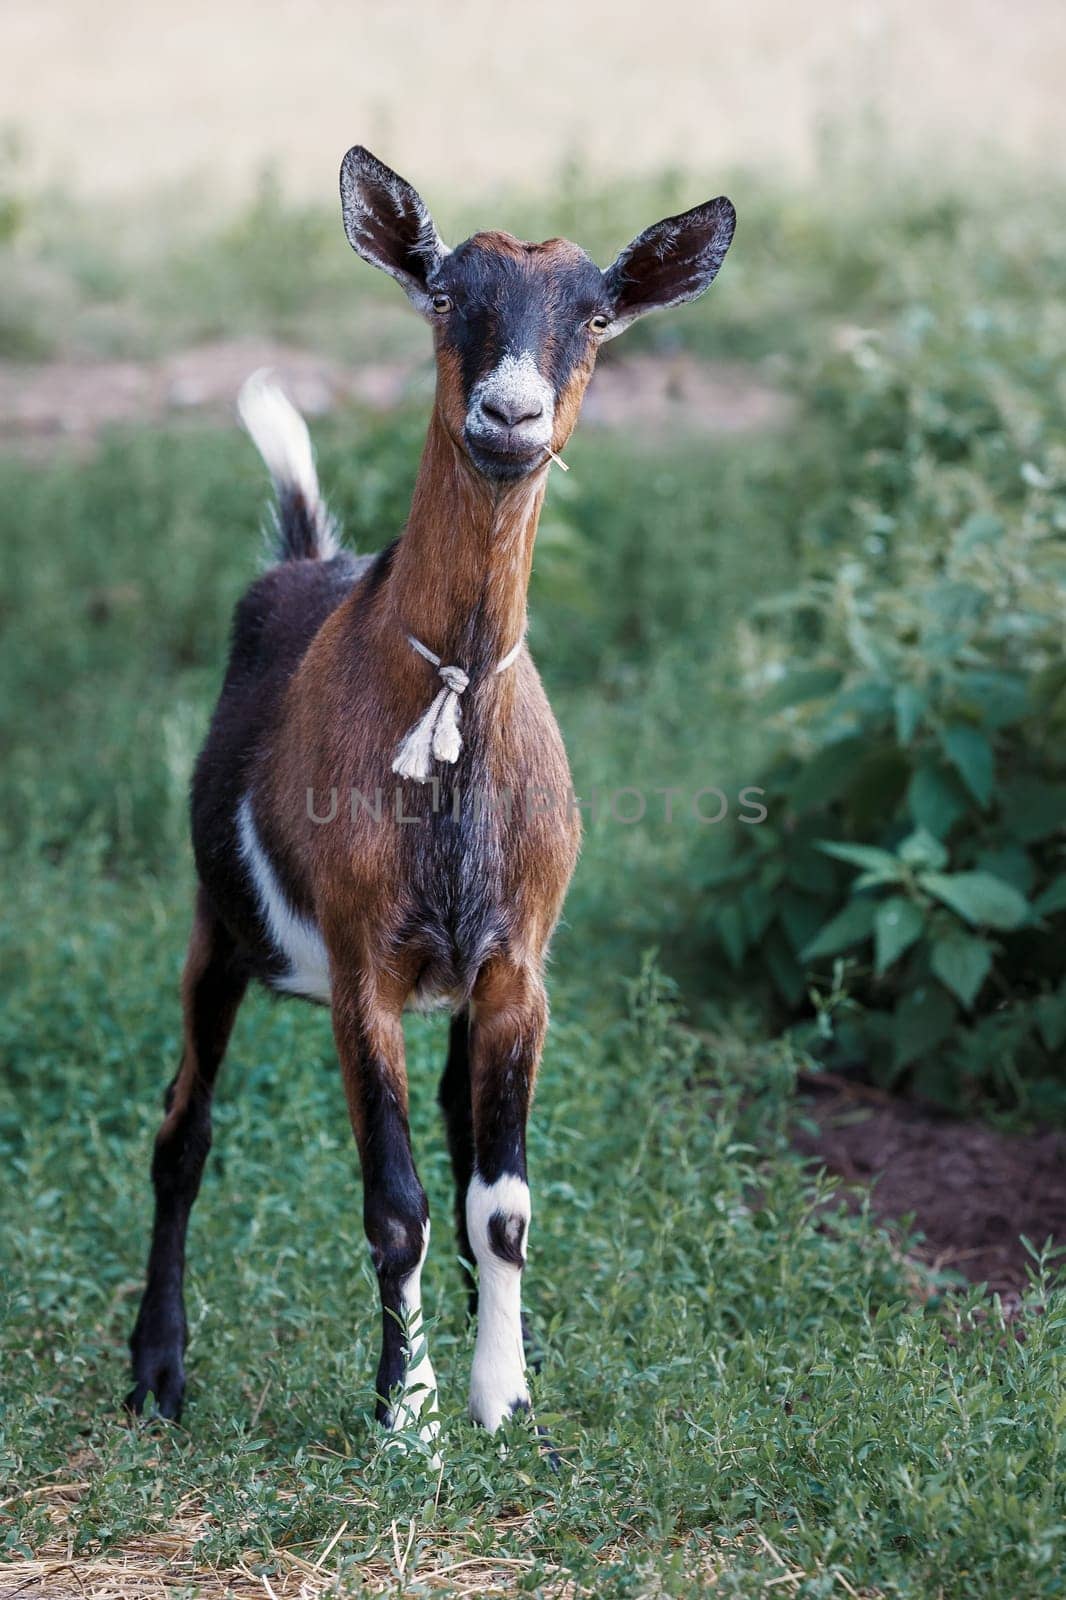 A young, small, brown goat with straight ears she listens intently and is very careful